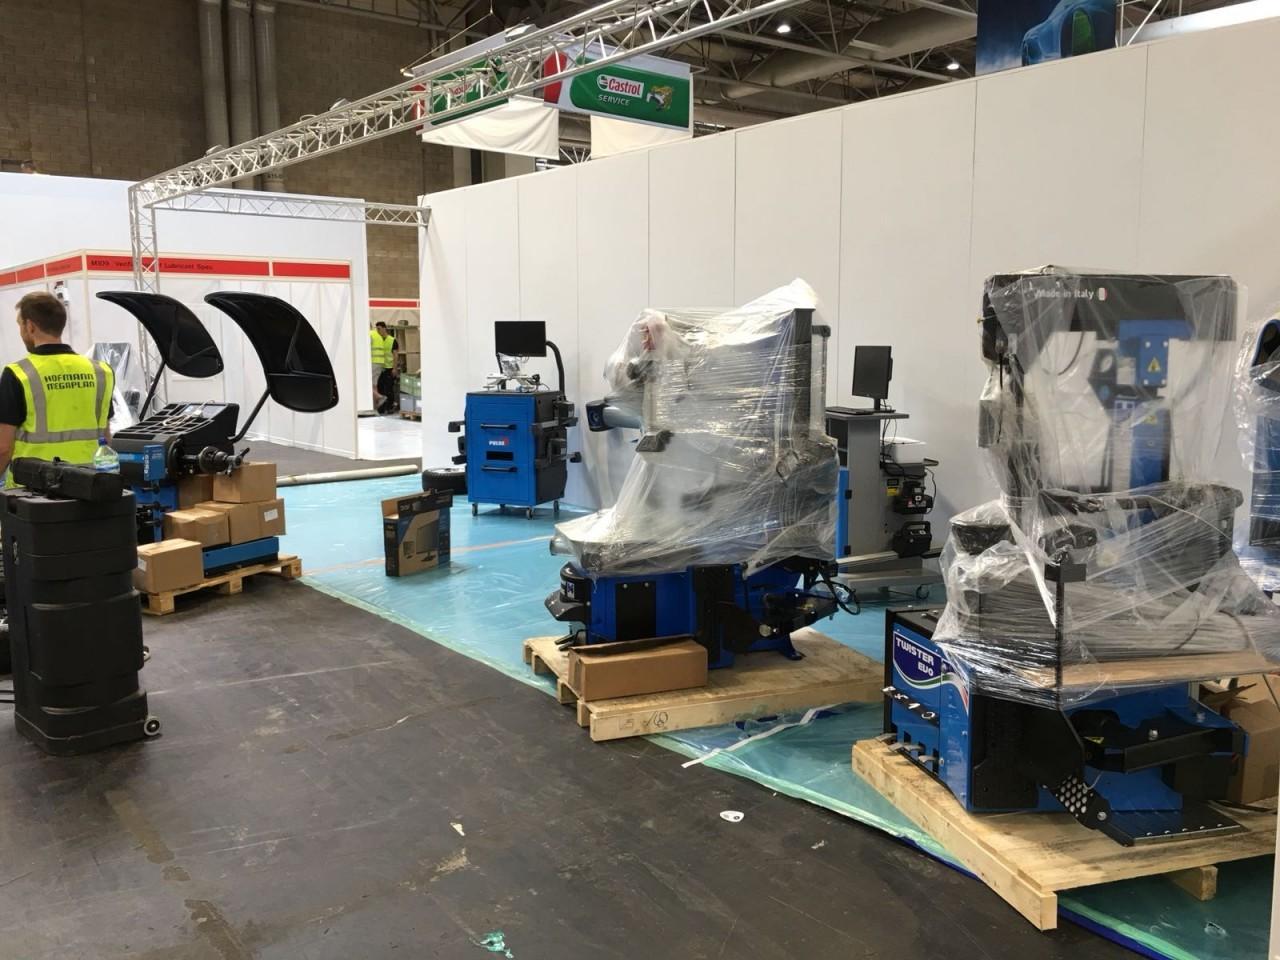 Unpacking the Tyre Fitting Equipment at Automechanika 2018